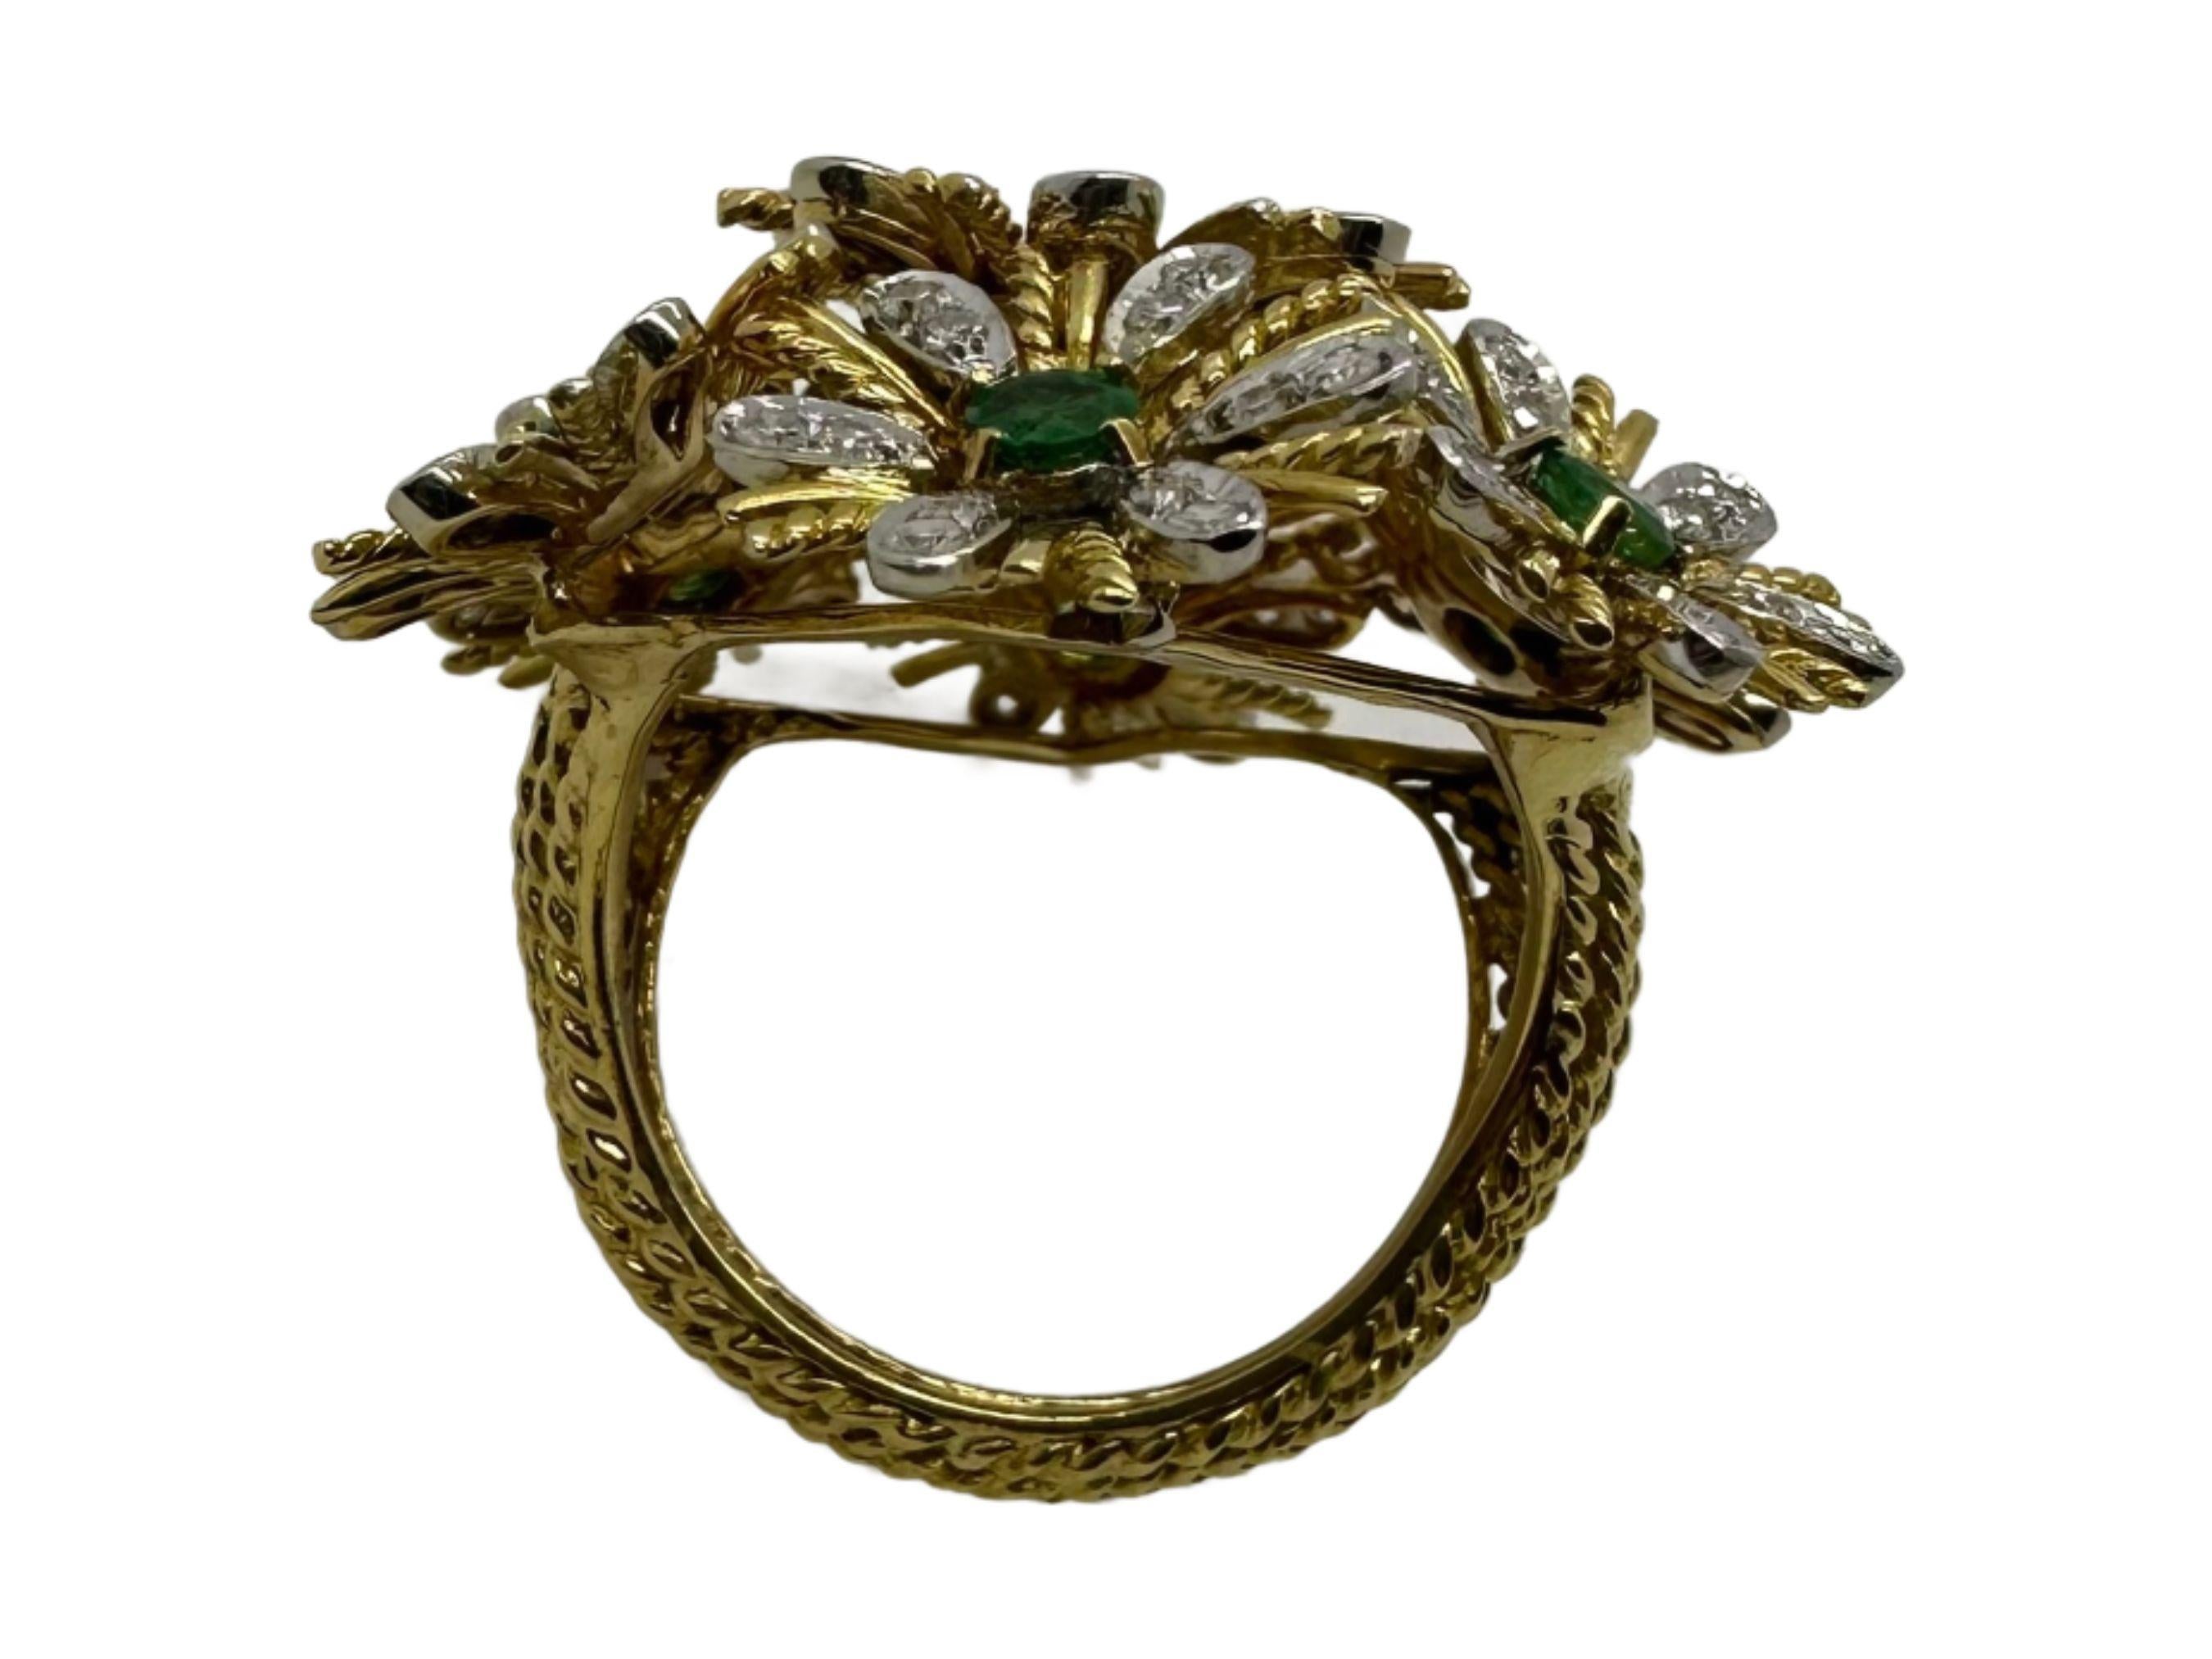 Indulge in the opulence of this exquisite Estate Multi-Flower Cocktail Ring, a true statement piece that marries elegance with vintage allure. In very good vintage condition, the ring exhibits minor surface wear consistent with its rich